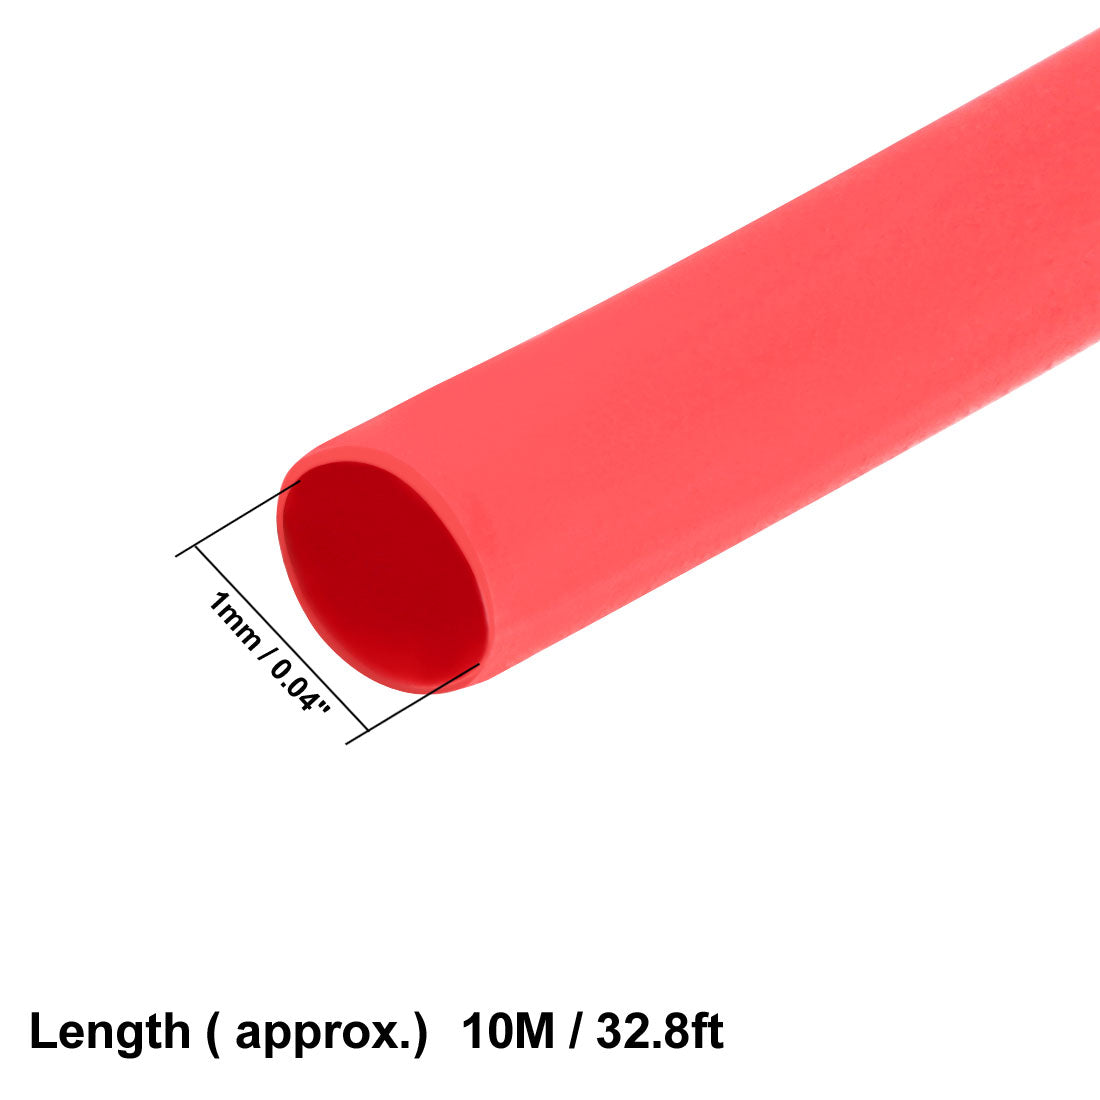 uxcell Uxcell Heat Shrink Tube 2:1 Electrical Insulation Tube Wire Cable Tubing Sleeving Wrap Red 1mm Diameter 10m Long